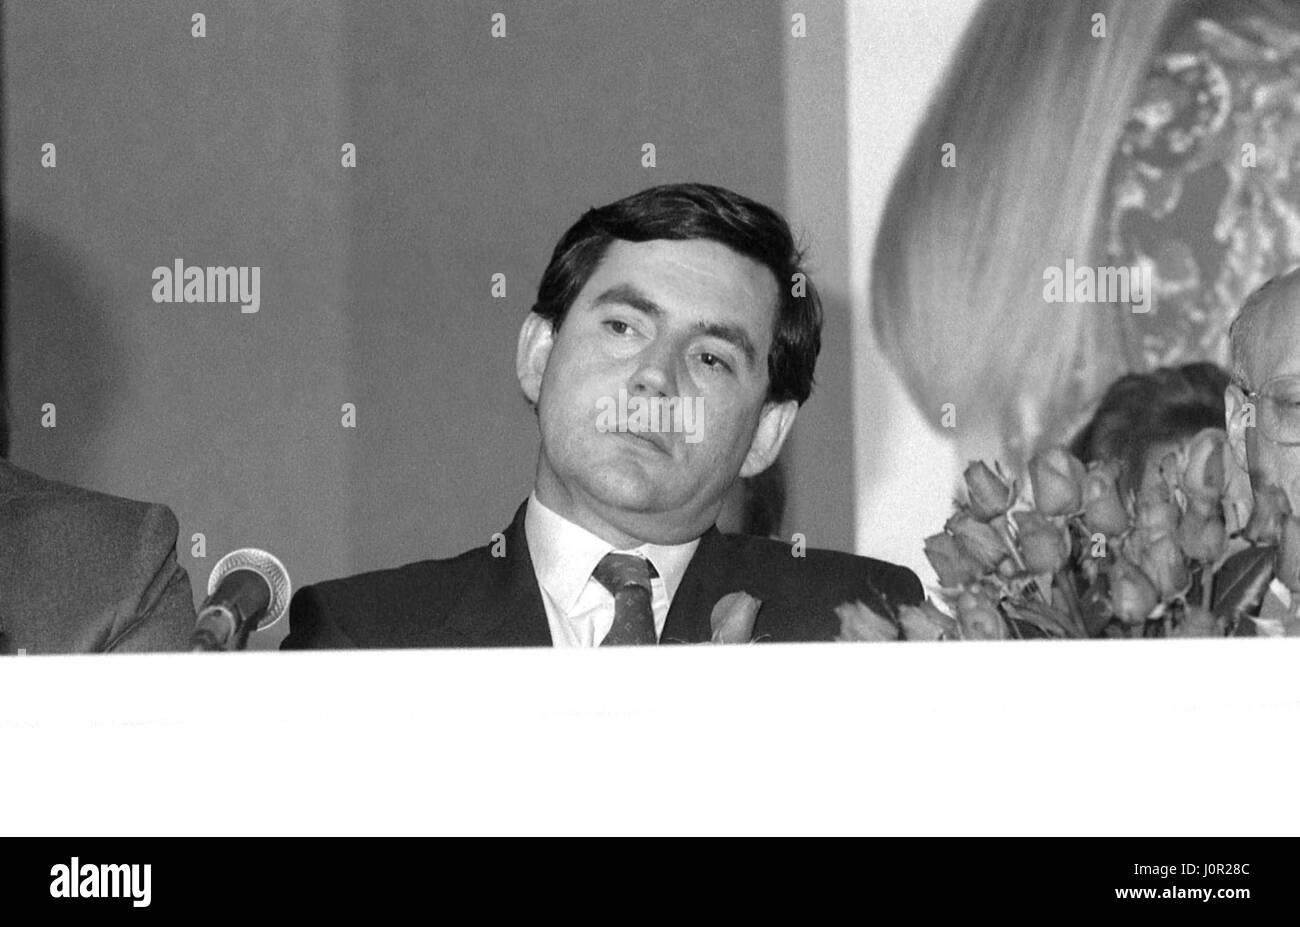 Gordon Brown, Shadow Secretary of State for Trade and Industry and Labour party Member of Parliament for Dunfermiline East, attends a policy launch press conference in London, England on May 24, 1990. Stock Photo